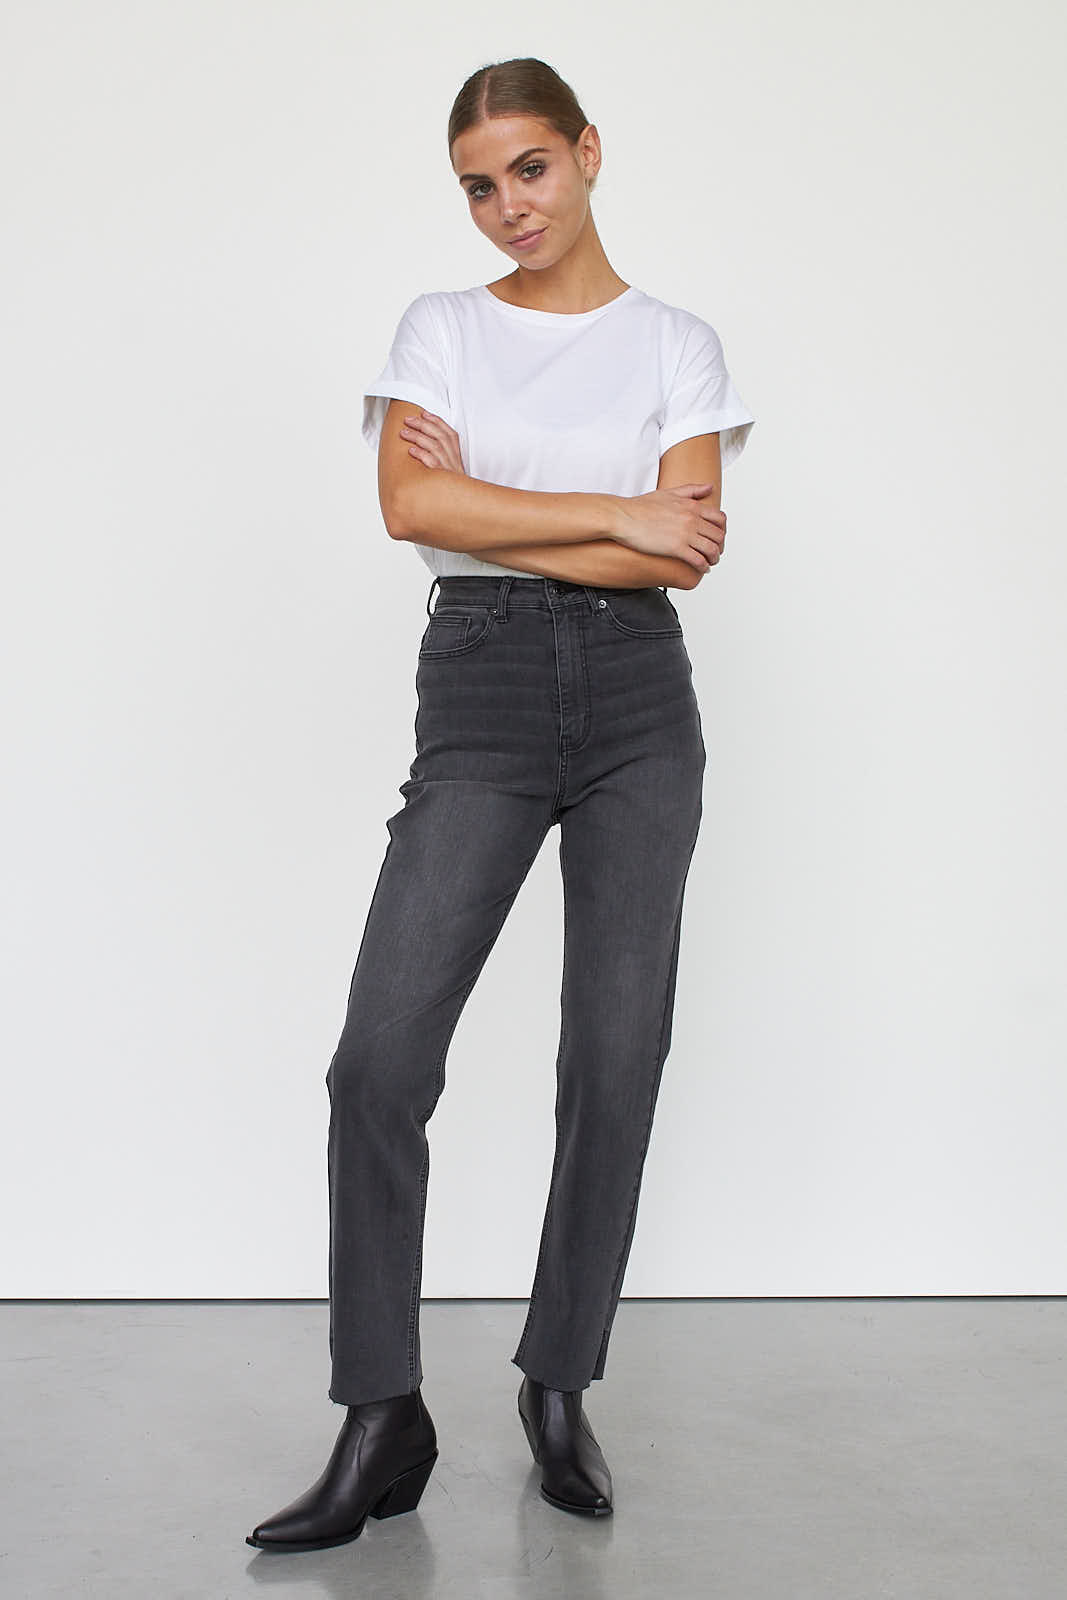 Buy Time and Tru Women's Sculpted Jegging  Perfect jeans, Women jeans,  High waisted mom jeans